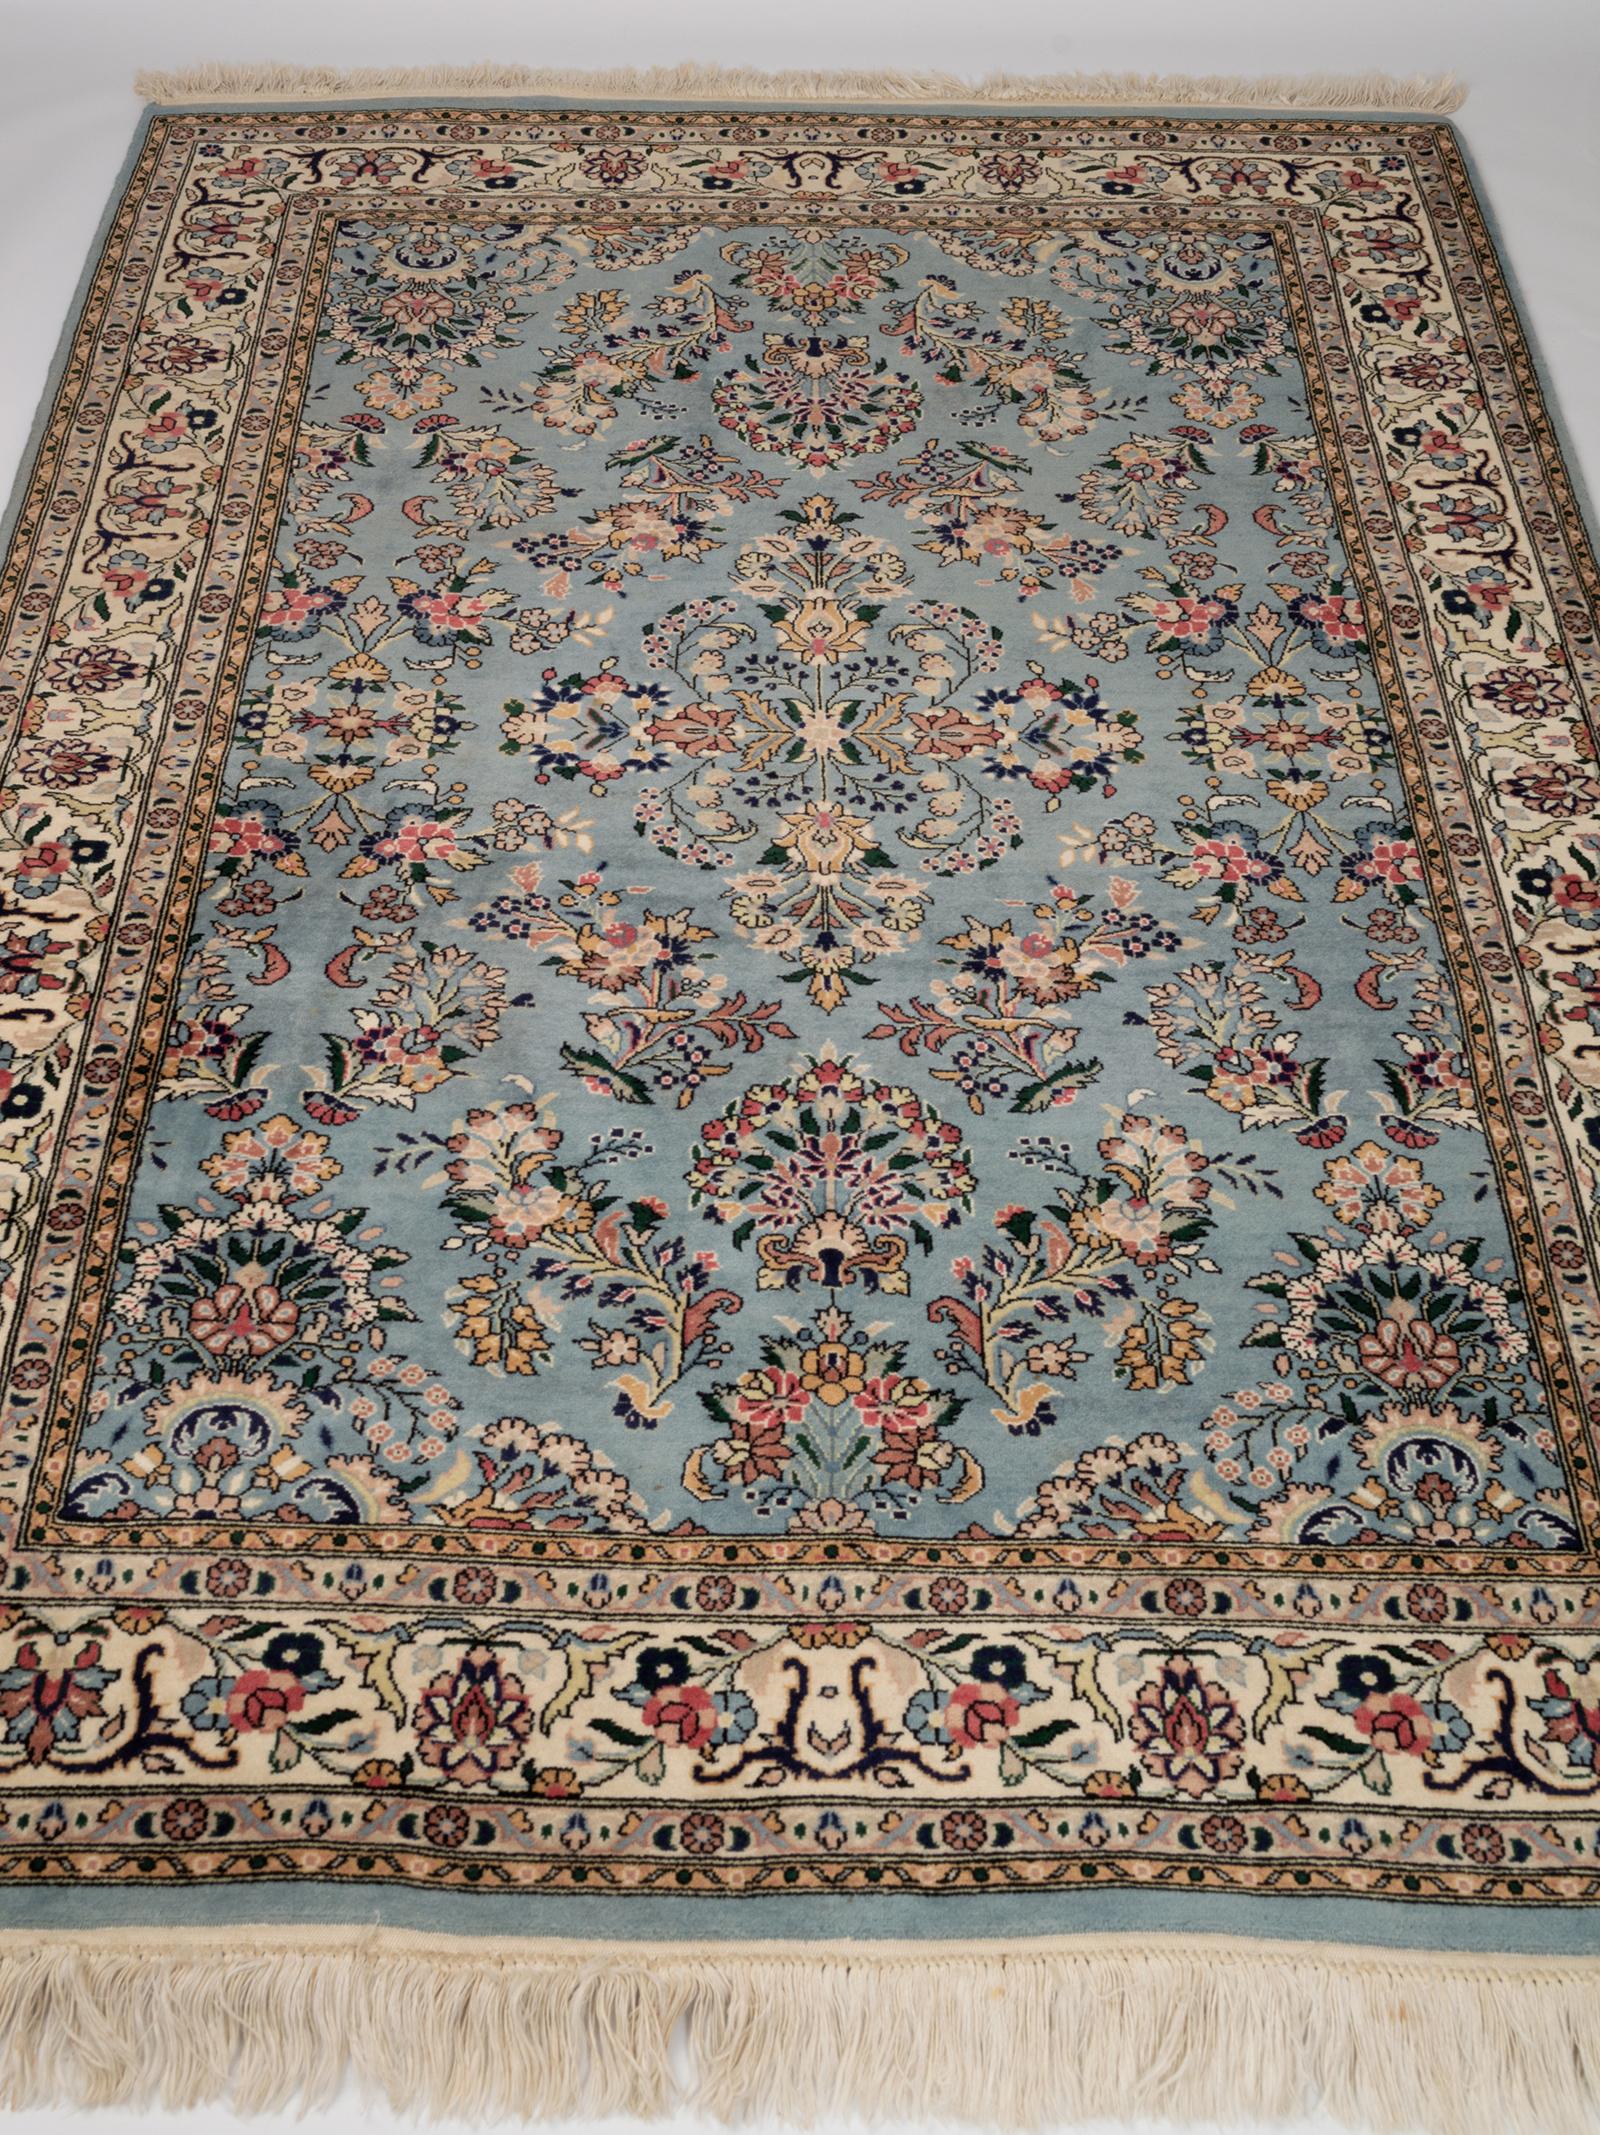 Persian Tabriz hand knotted floral blue and ivory rug, circa 1970.
100% wool pile on a cotton foundation.
Ground color is light blue with ivory detailing.
In excellent vintage condition commensurate of age. Beautifully preserved.